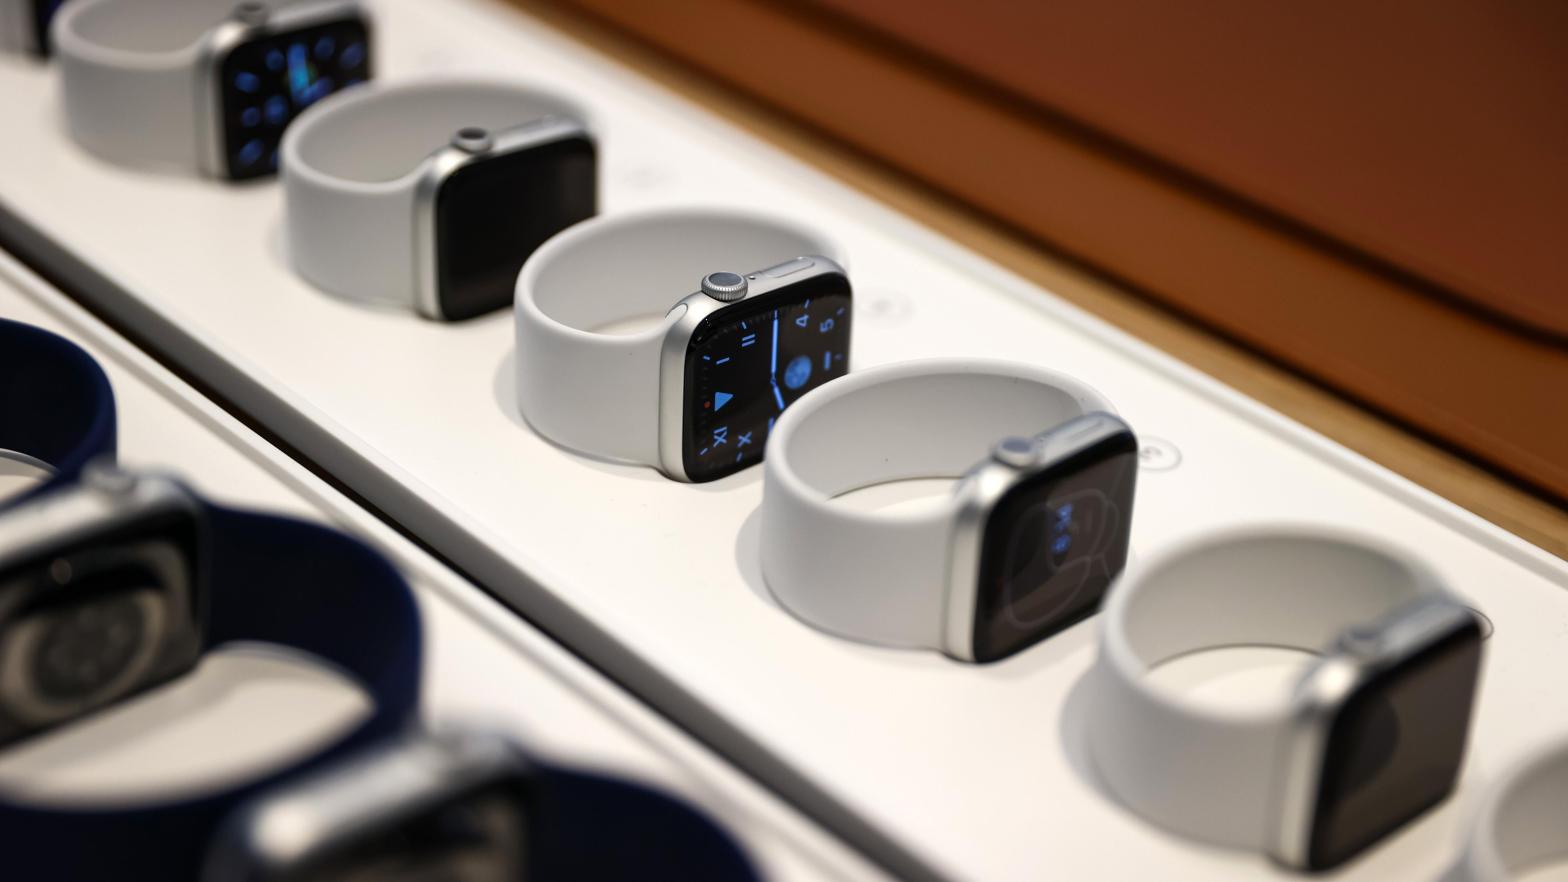 The latest Apple Watches have included blood oxygen sensors using green, red, and infrared LEDs, though researchers have noted for decades that such sensors routinely fail at accurately gauging blood oxygen on darker skin.  (Photo: Feline Lim, Getty Images)